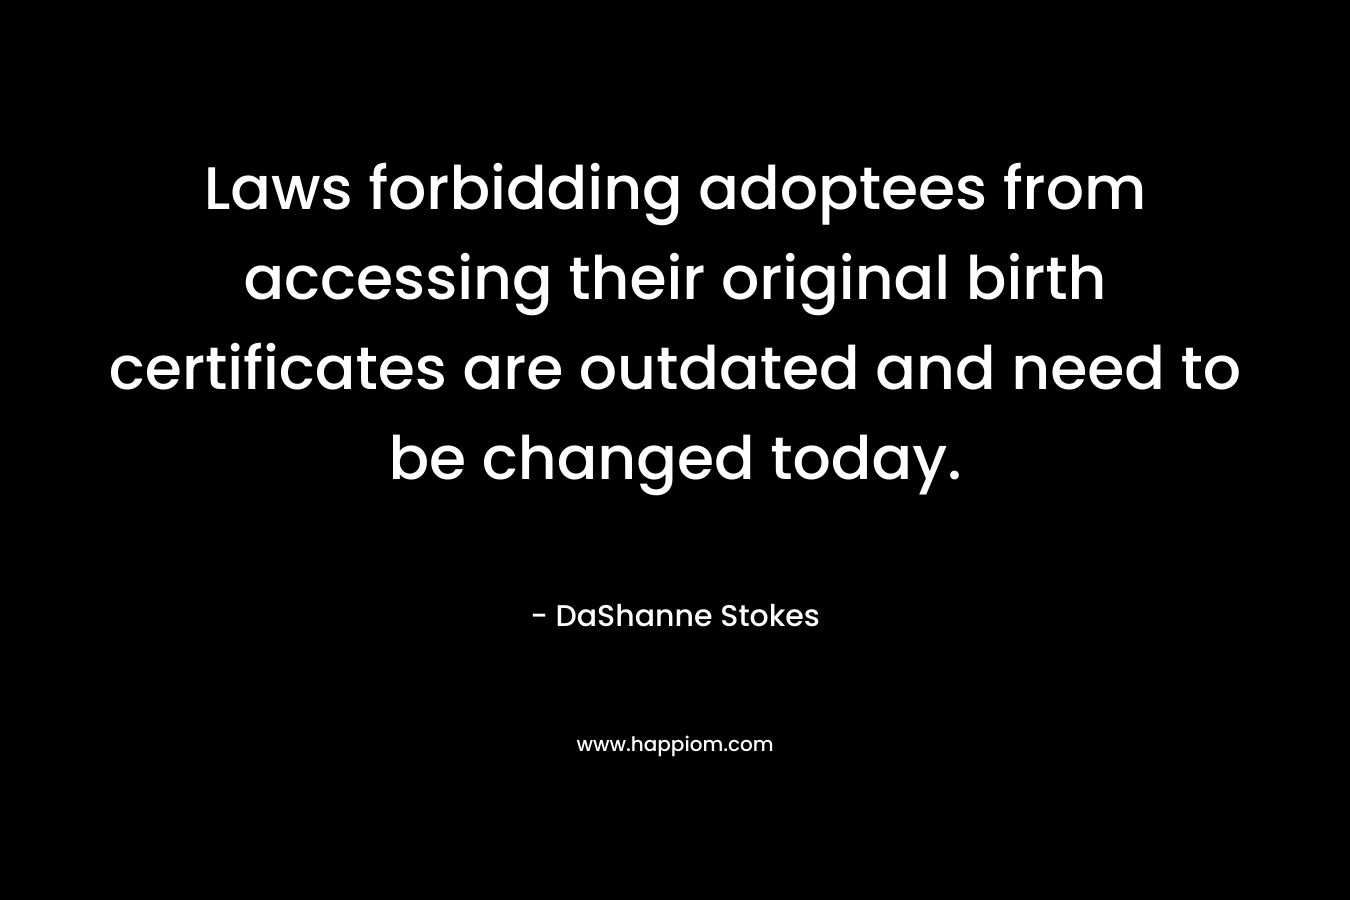 Laws forbidding adoptees from accessing their original birth certificates are outdated and need to be changed today. – DaShanne Stokes